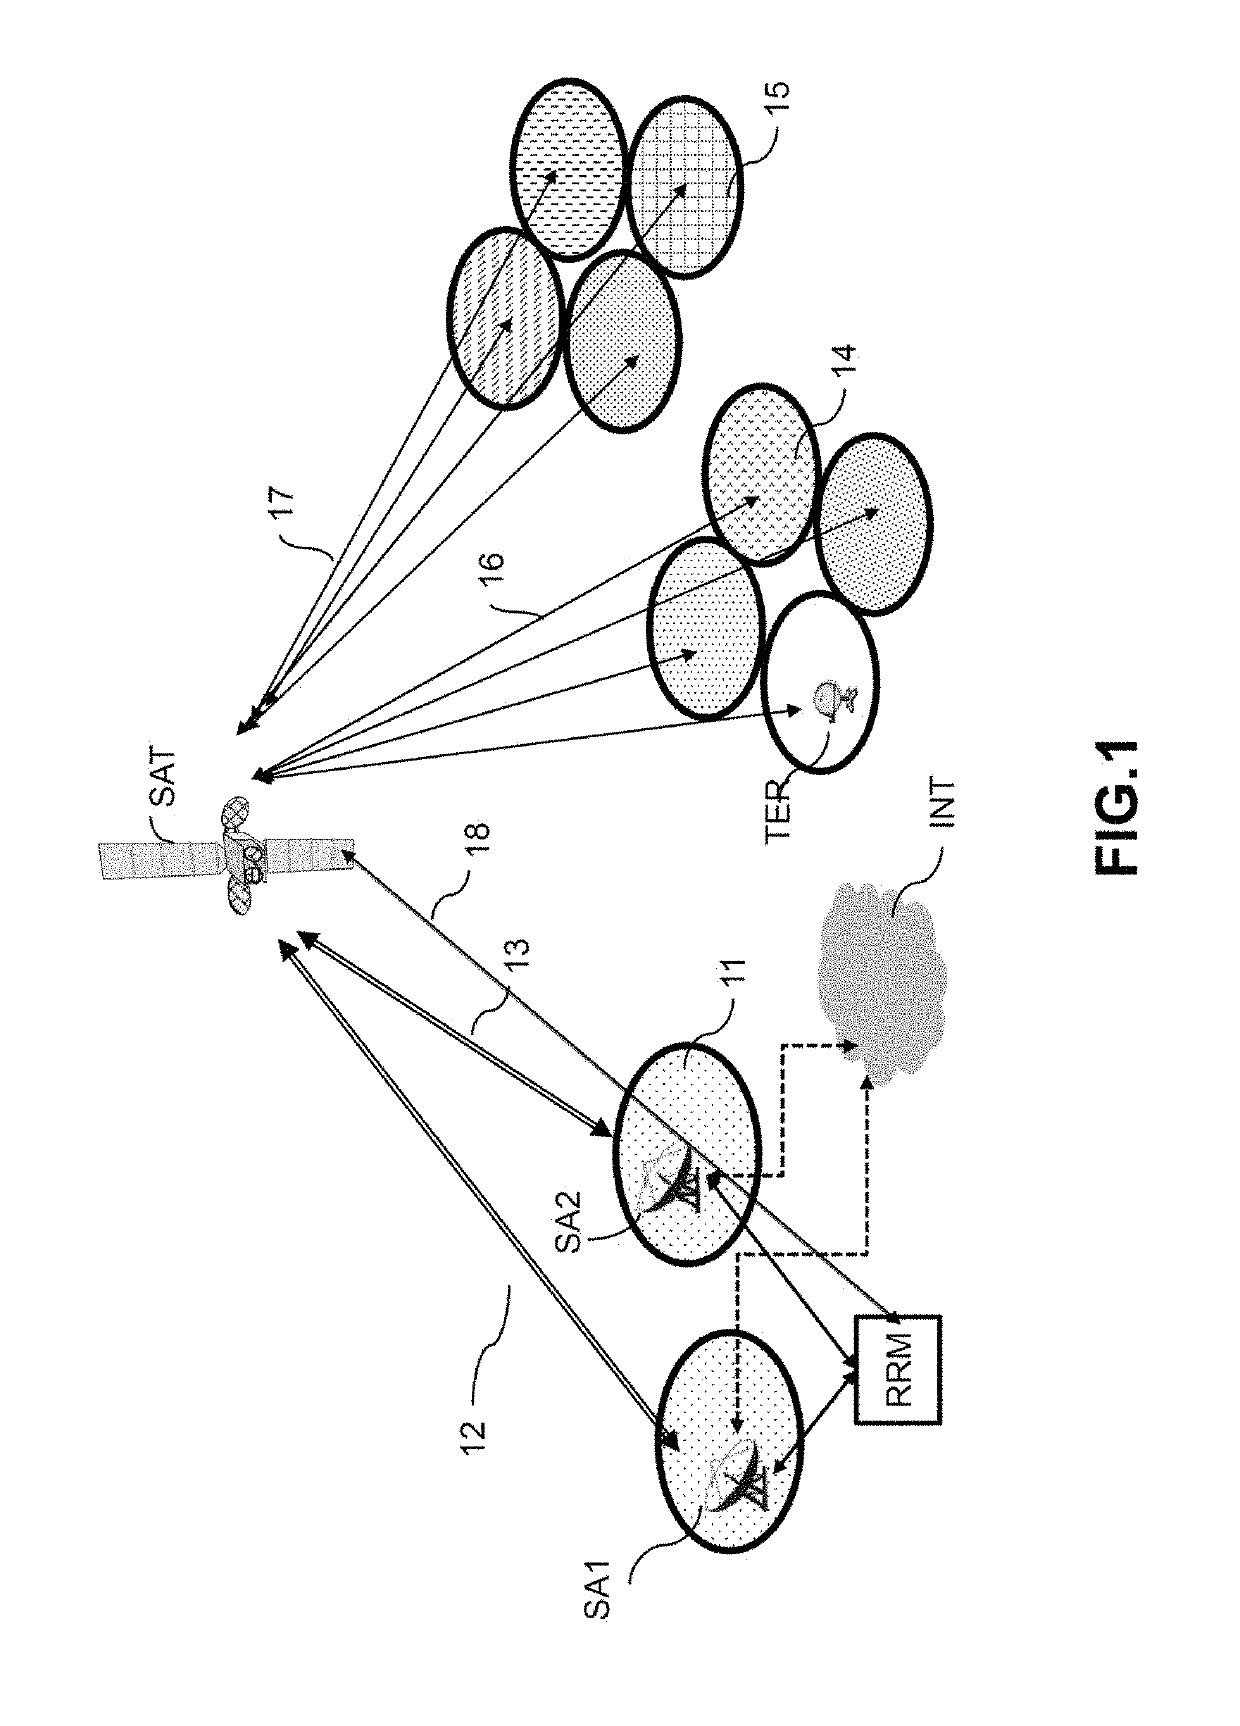 Method of allocating frequency resources for a satellite telecommunication system